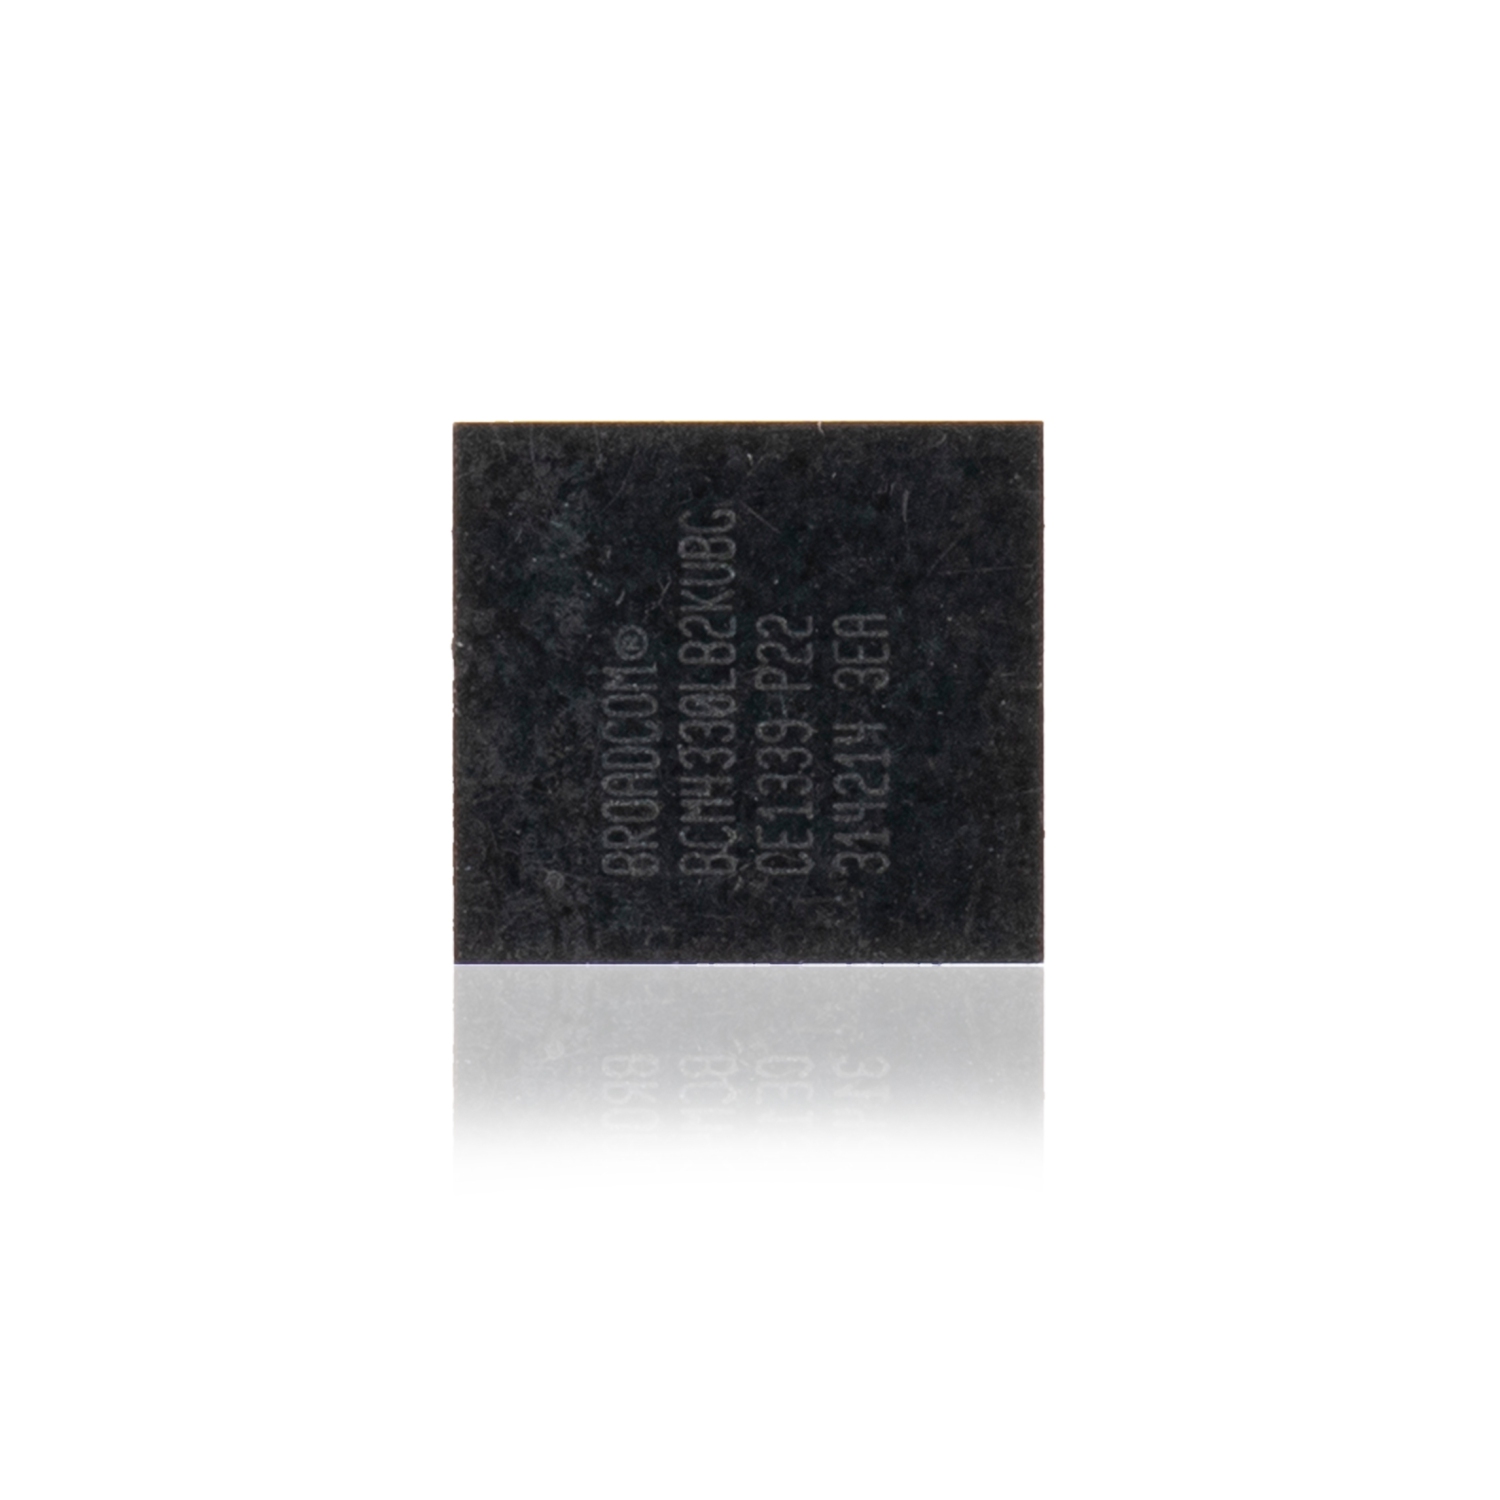 Replacement WiFi IC Compatible For Samsung Galaxy Grand Prime (G530) (BCM4330LB)